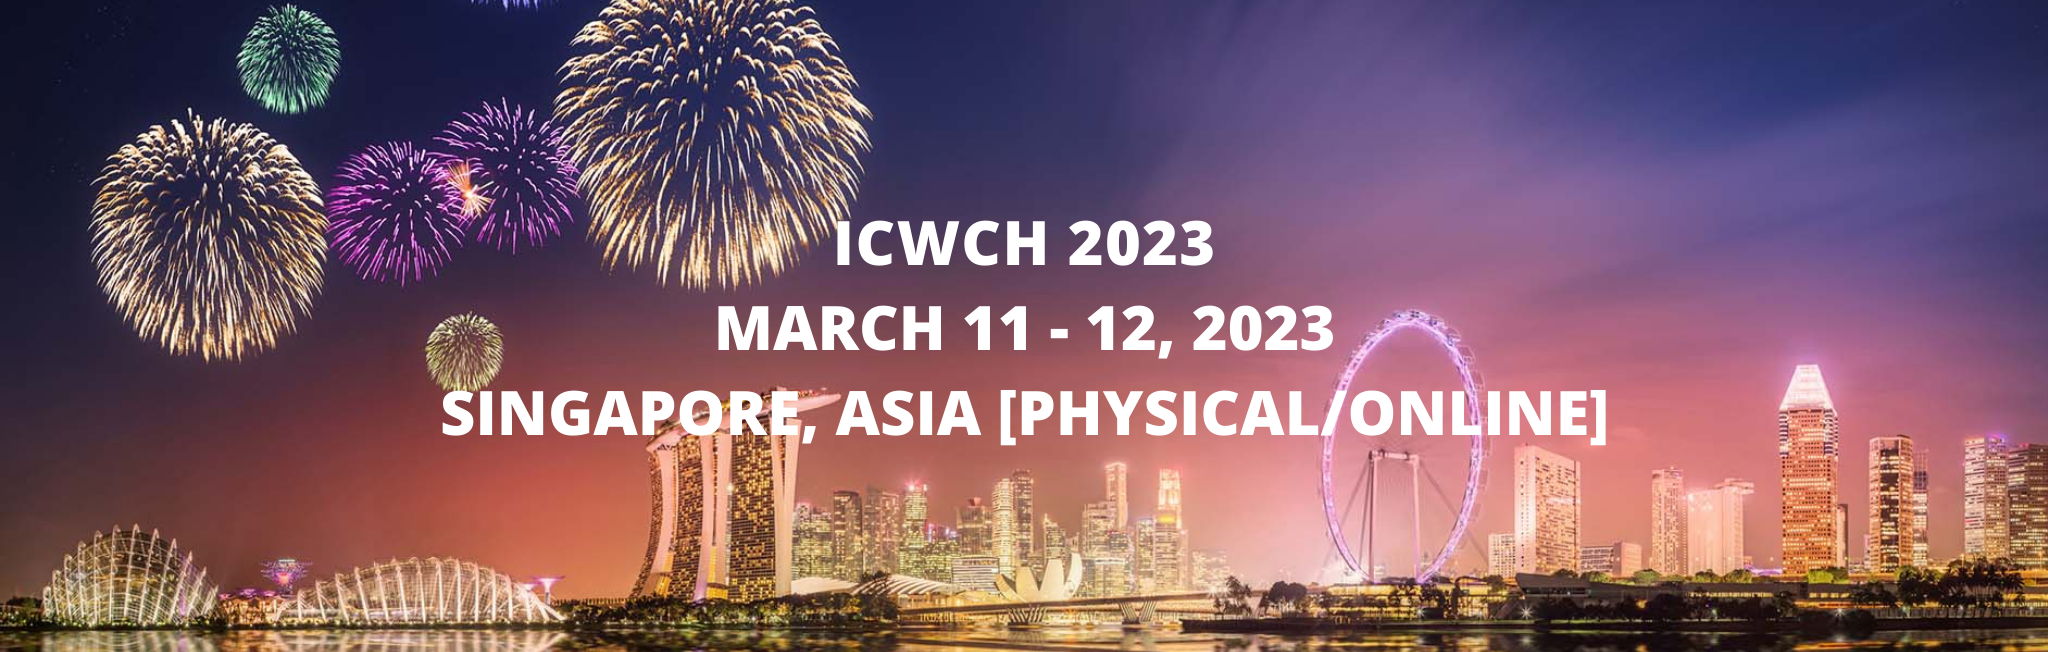 E CONFERENCES - ICWCH 2023